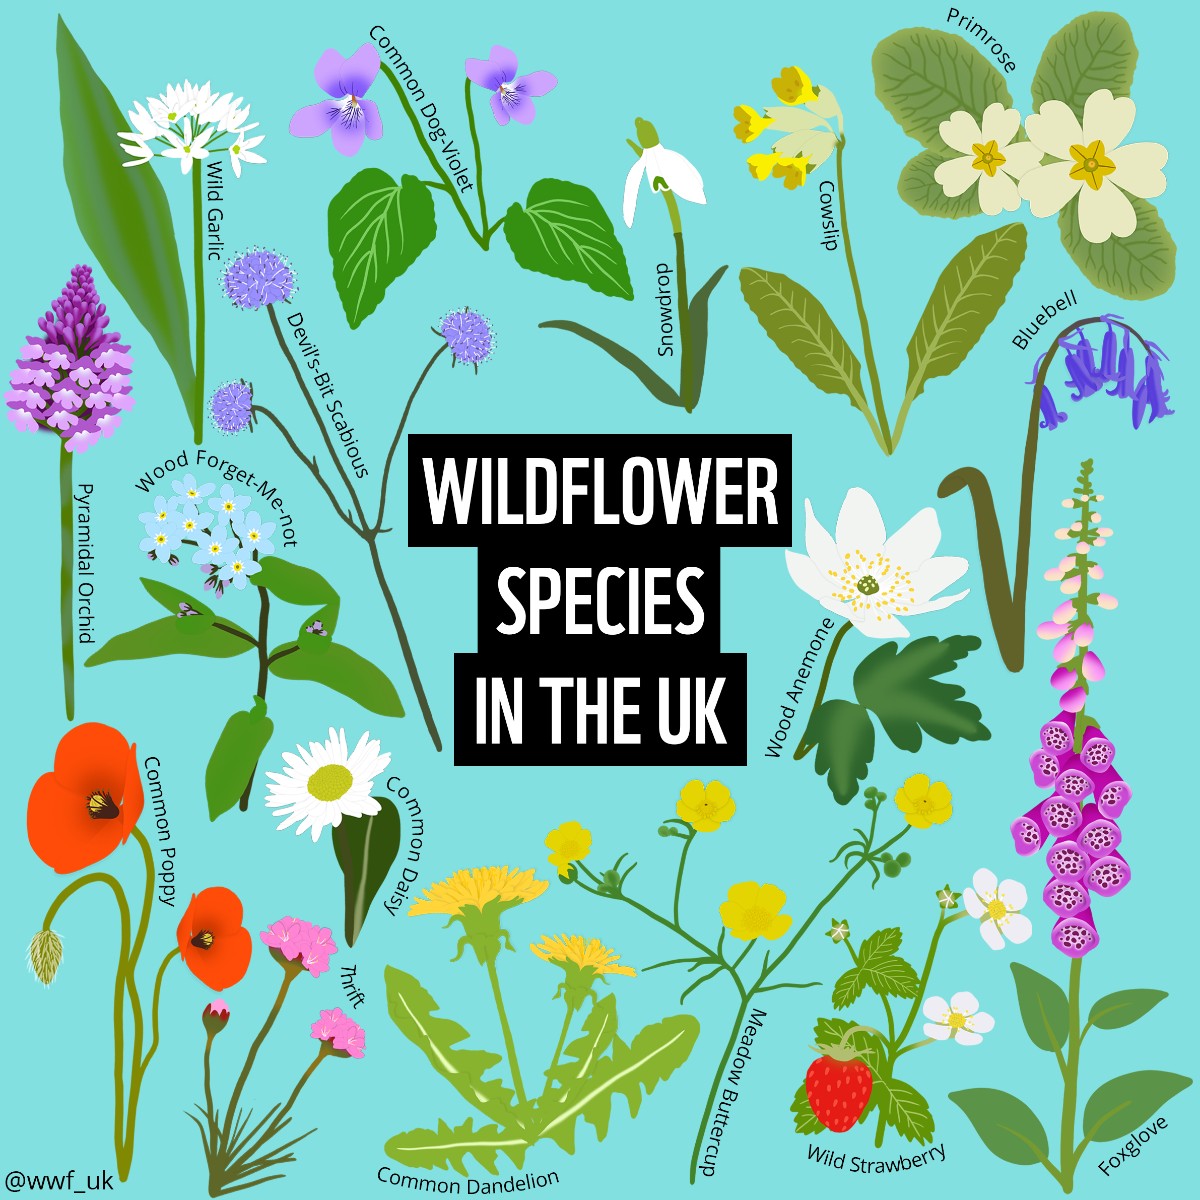 Just some of the incredible species of UK wildflowers you could see, if you let it grow this #NoMowMay. 🌸🌱